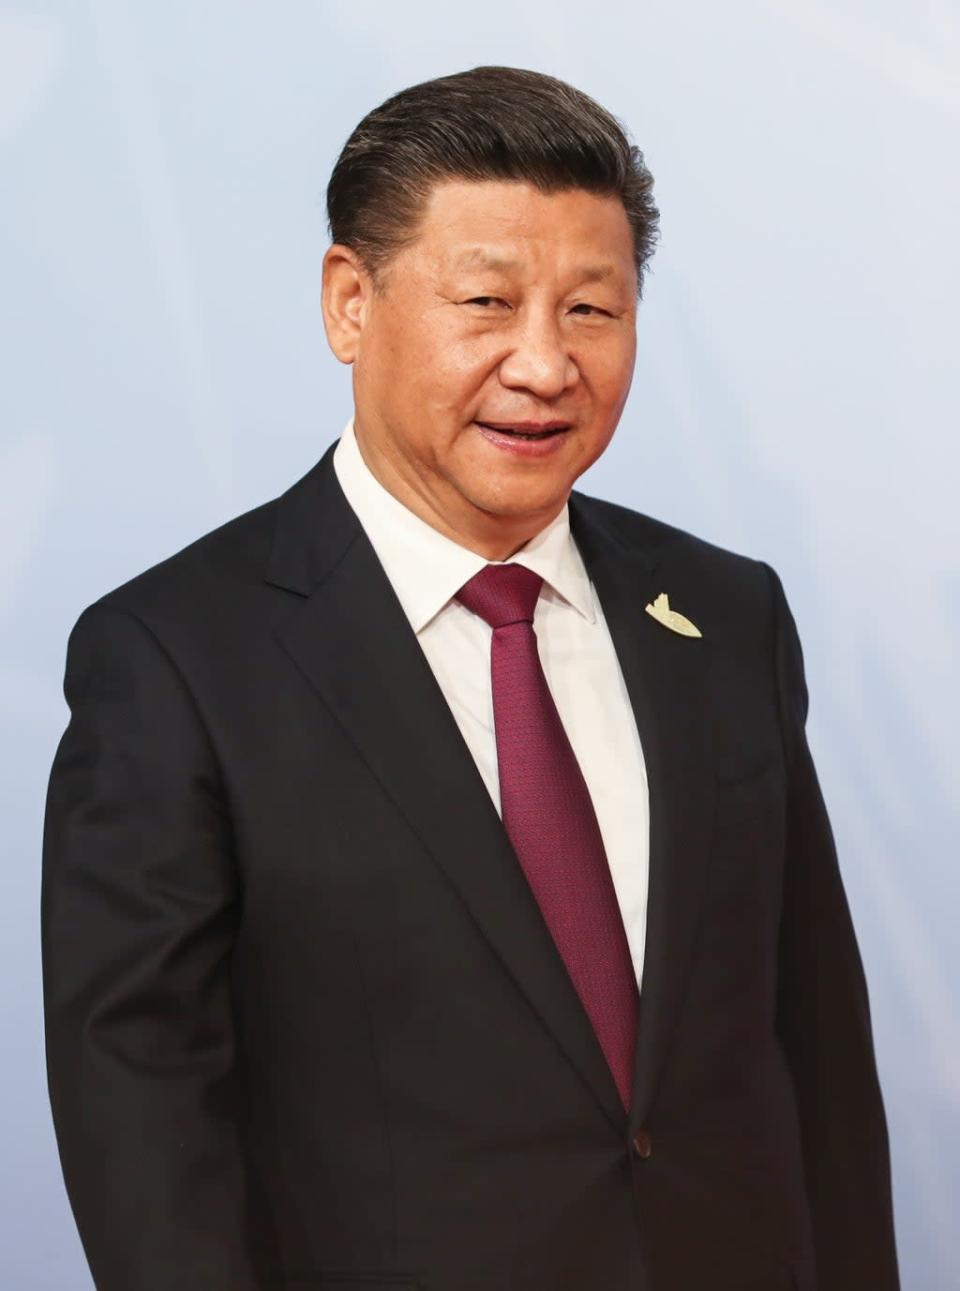 Chinese President Xi Jinping is accused of overseeing an intensified suppression of human rights in the country (Matt Cardy/PA) (PA Archive)